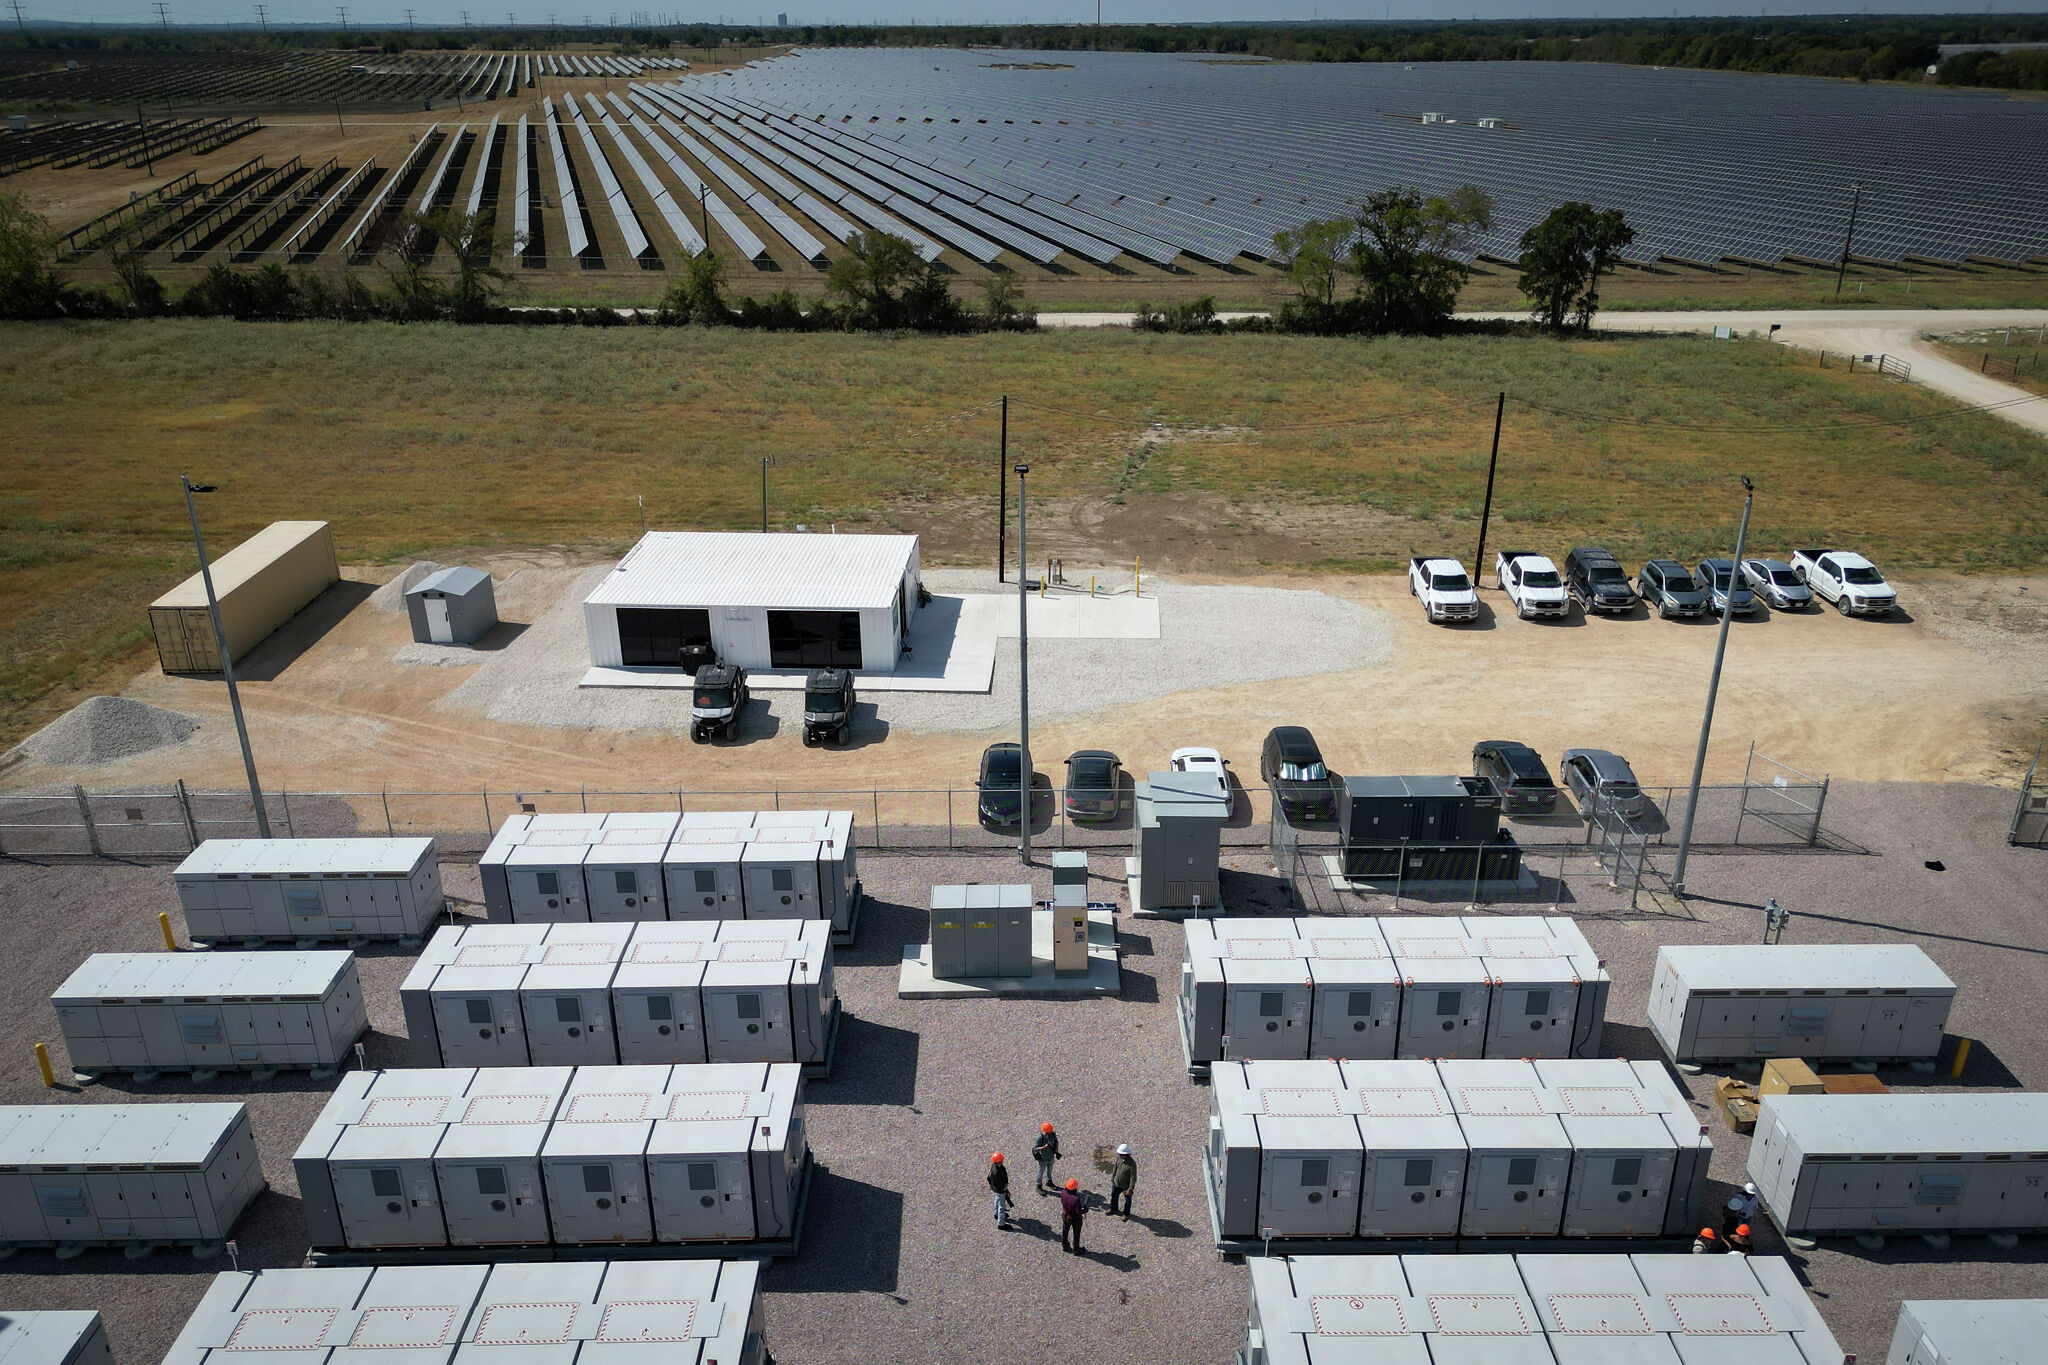 Houston area cities wary of grid-scale battery storage